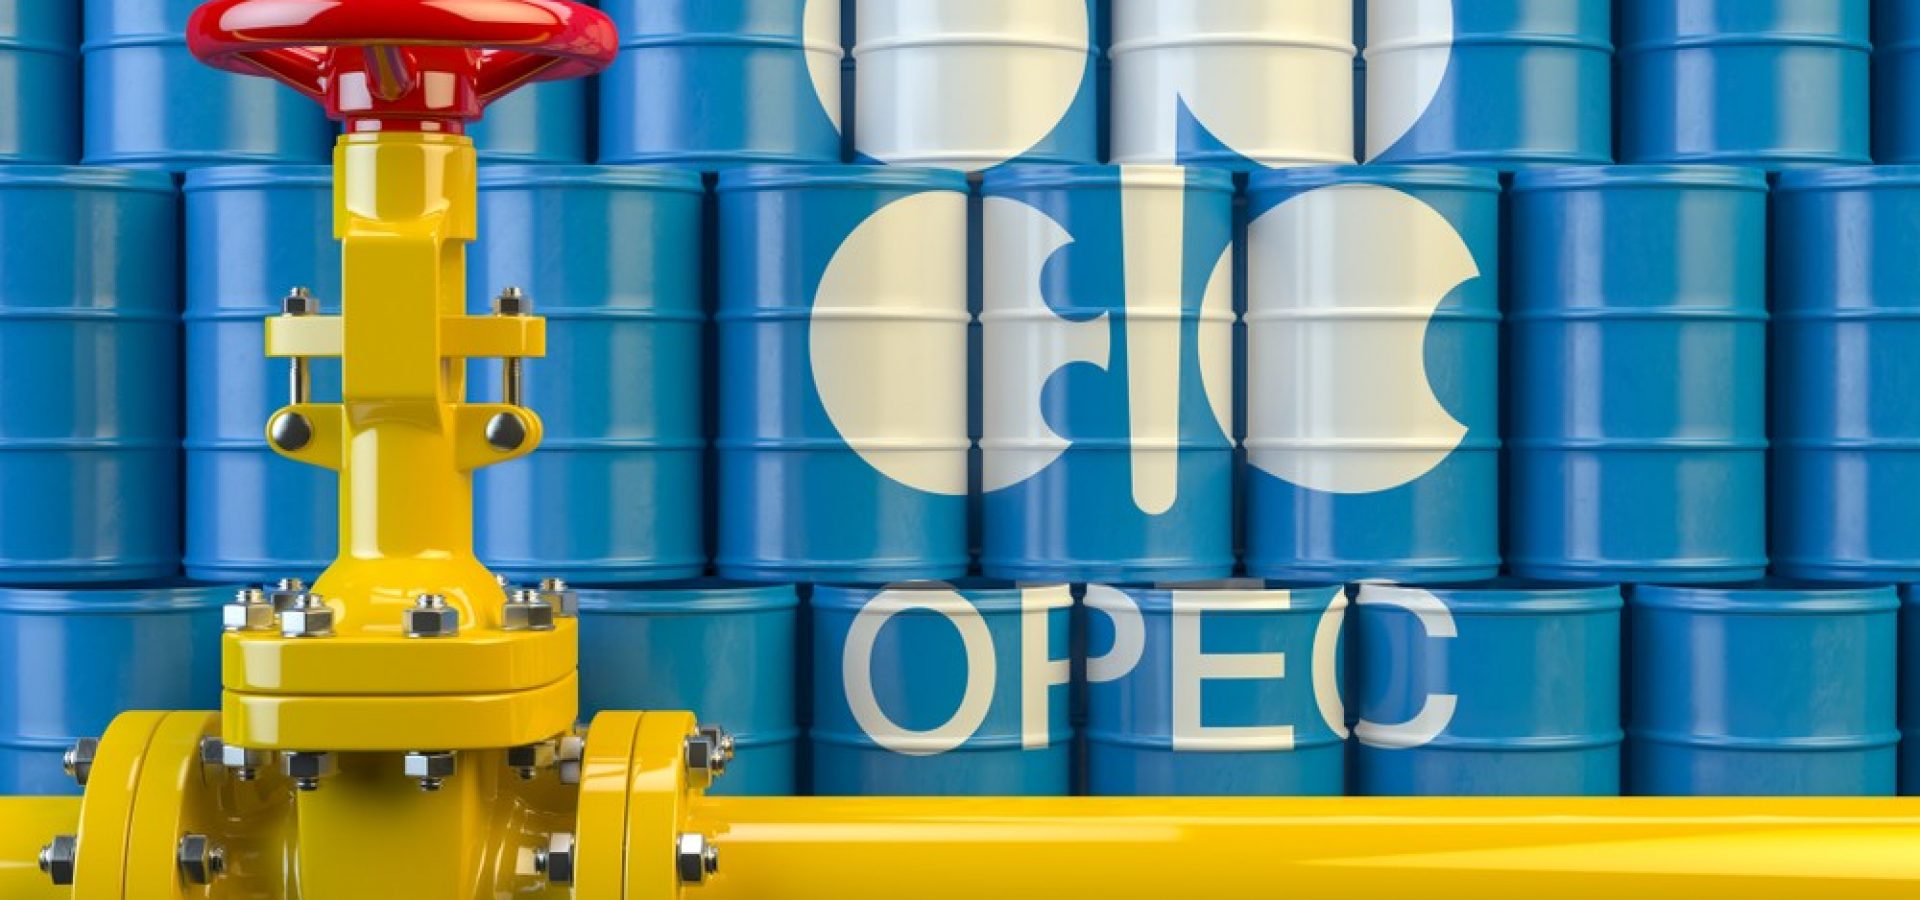 Wibest – OPEC Nations: OPEC logo on blue crude containers and yellow pipelines.